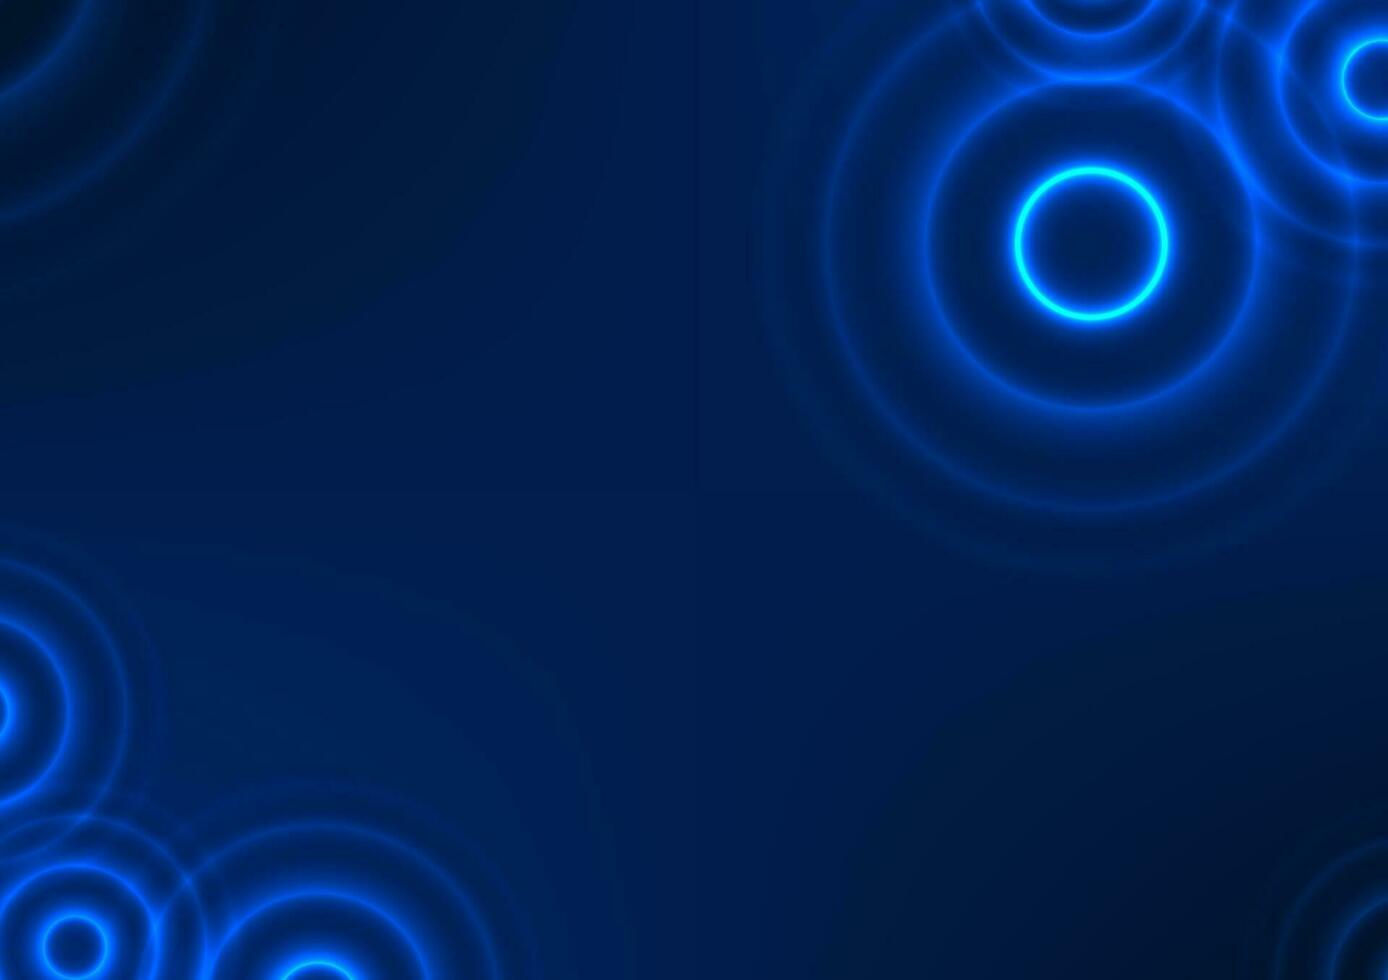 Abstract background which uses the shape of a geometric circle to design a shape like a wave that ripples many times Vector illustration in dark blue tones.